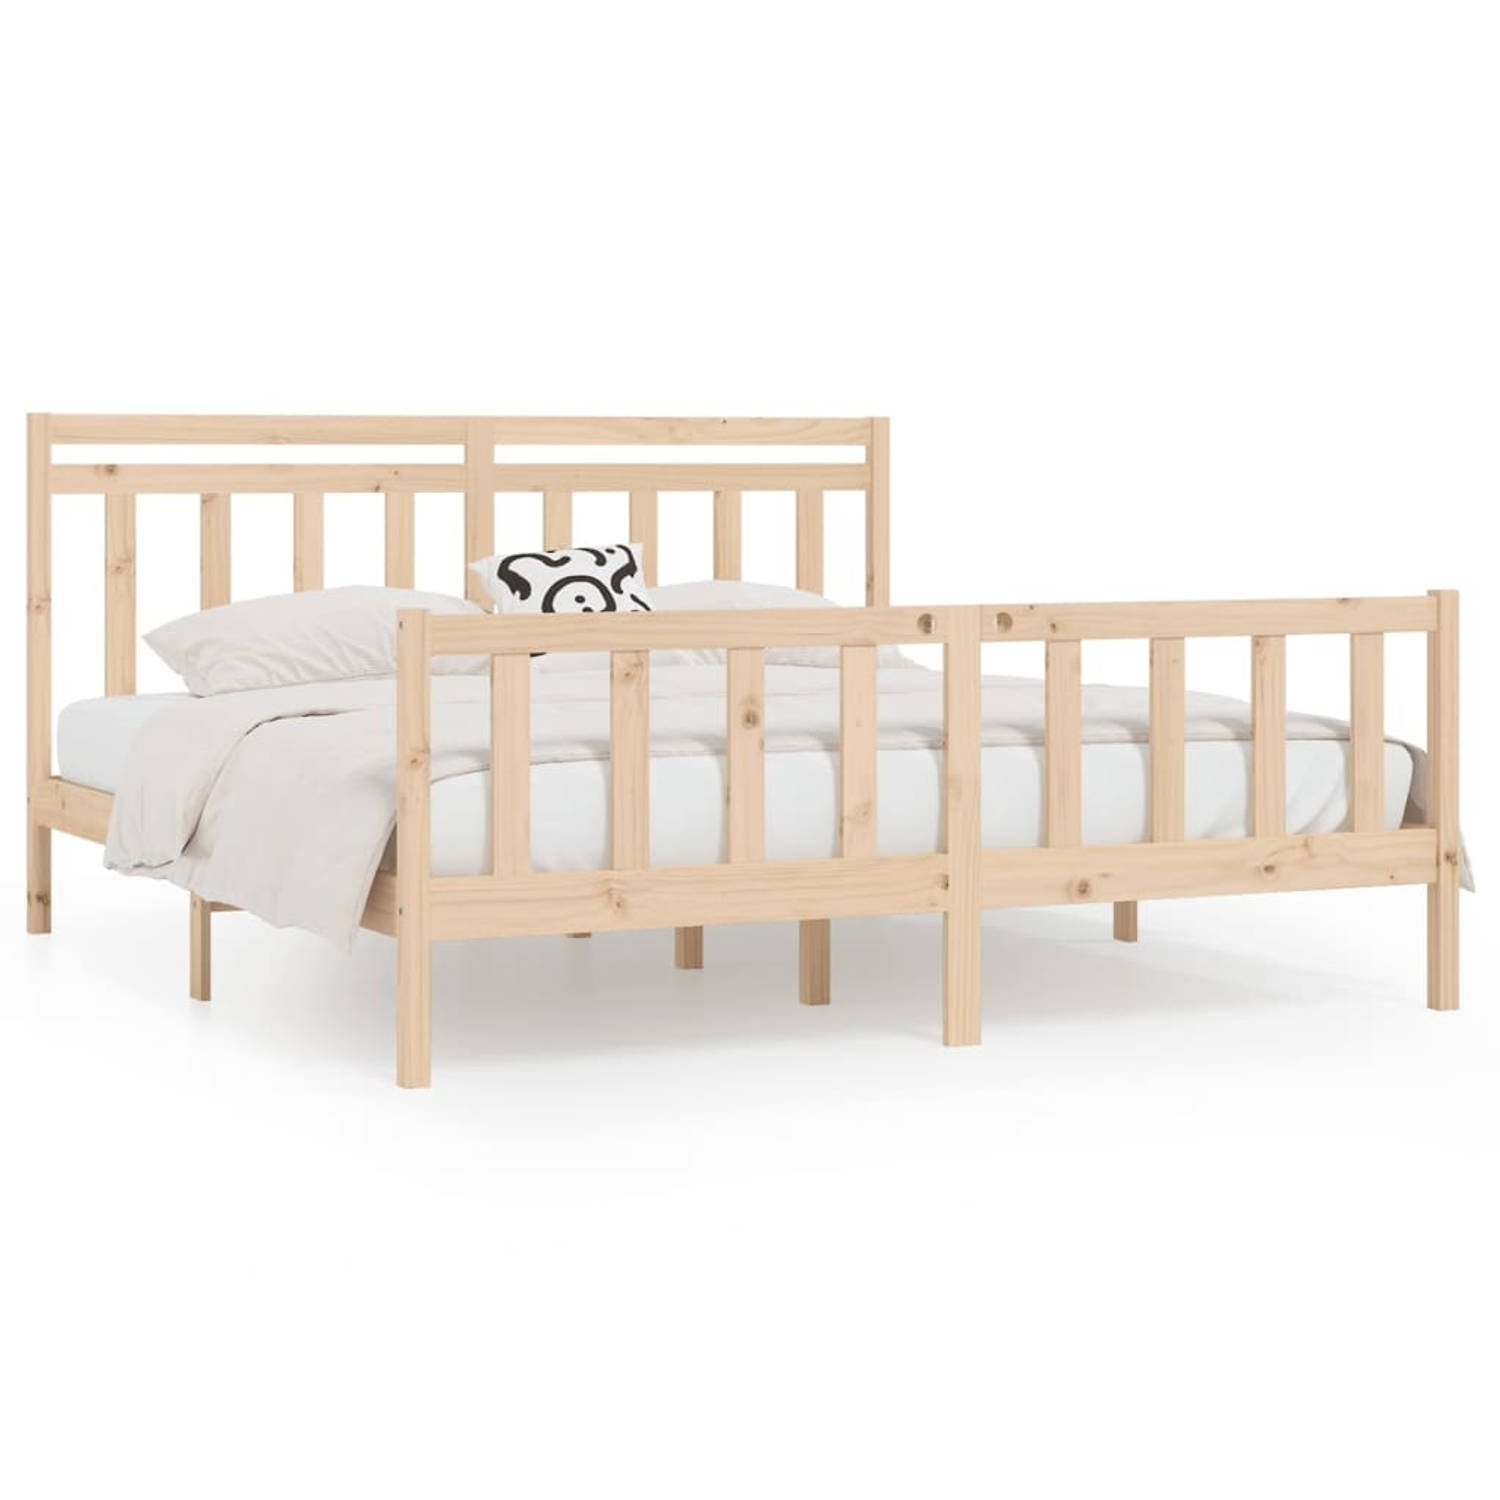 The Living Store Bedframe massief grenenhout 180x200 cm 6FT Super King - Bedframe - Bedframes - Massief Houten Bed - Tweepersoonsbed - Bed - Bedombouw - Dubbel Bed - Frame - Bed Fr